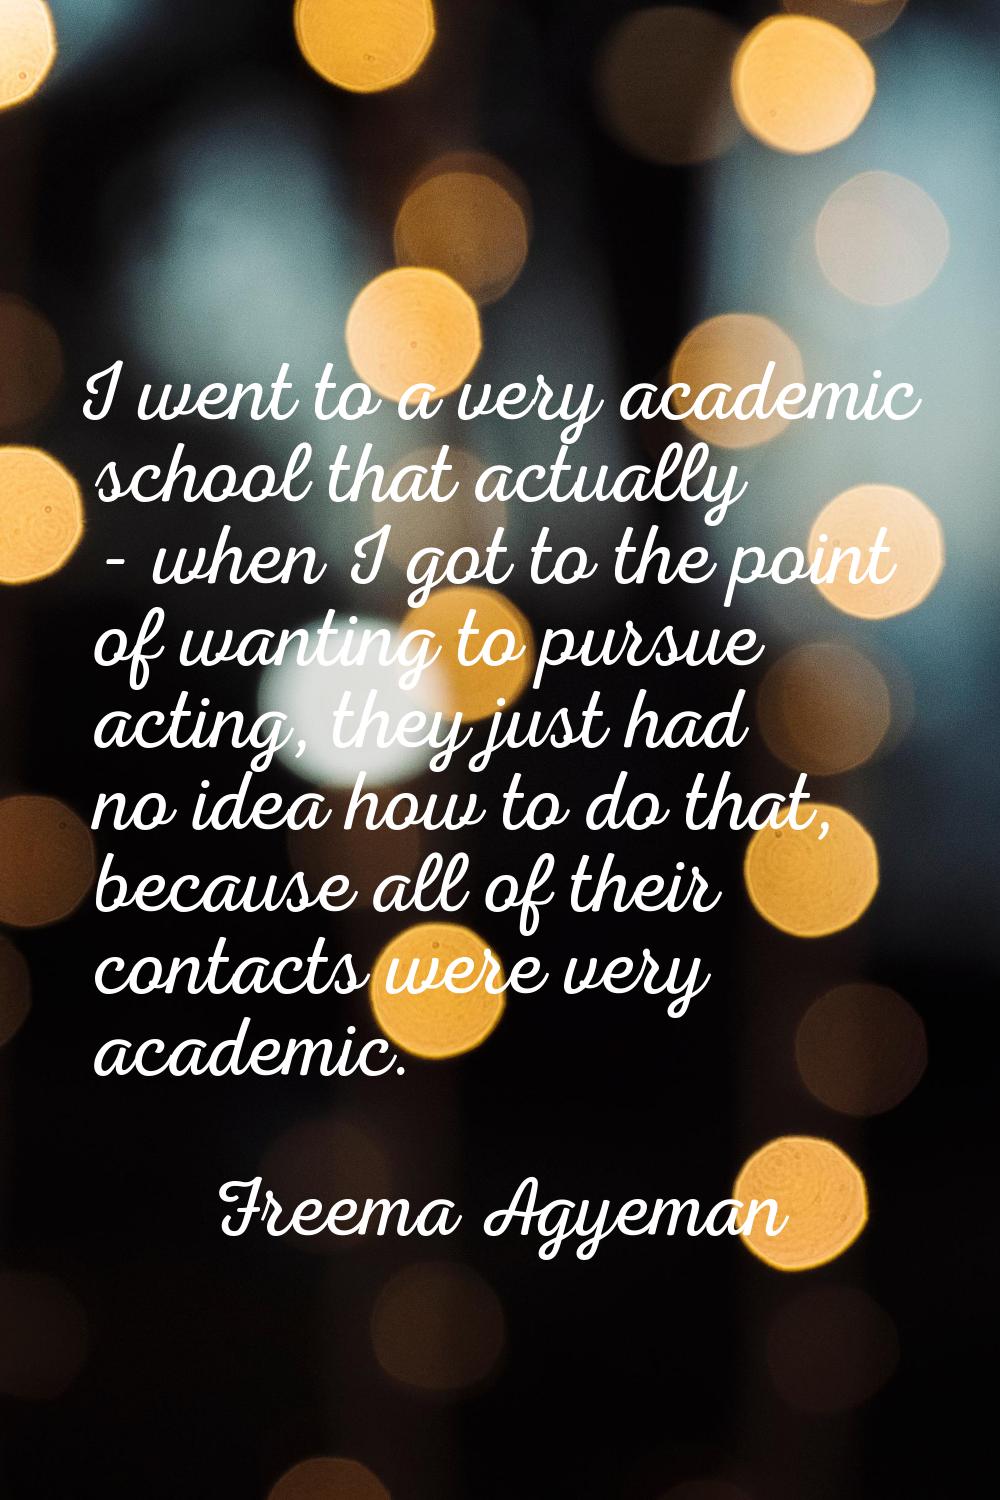 I went to a very academic school that actually - when I got to the point of wanting to pursue actin